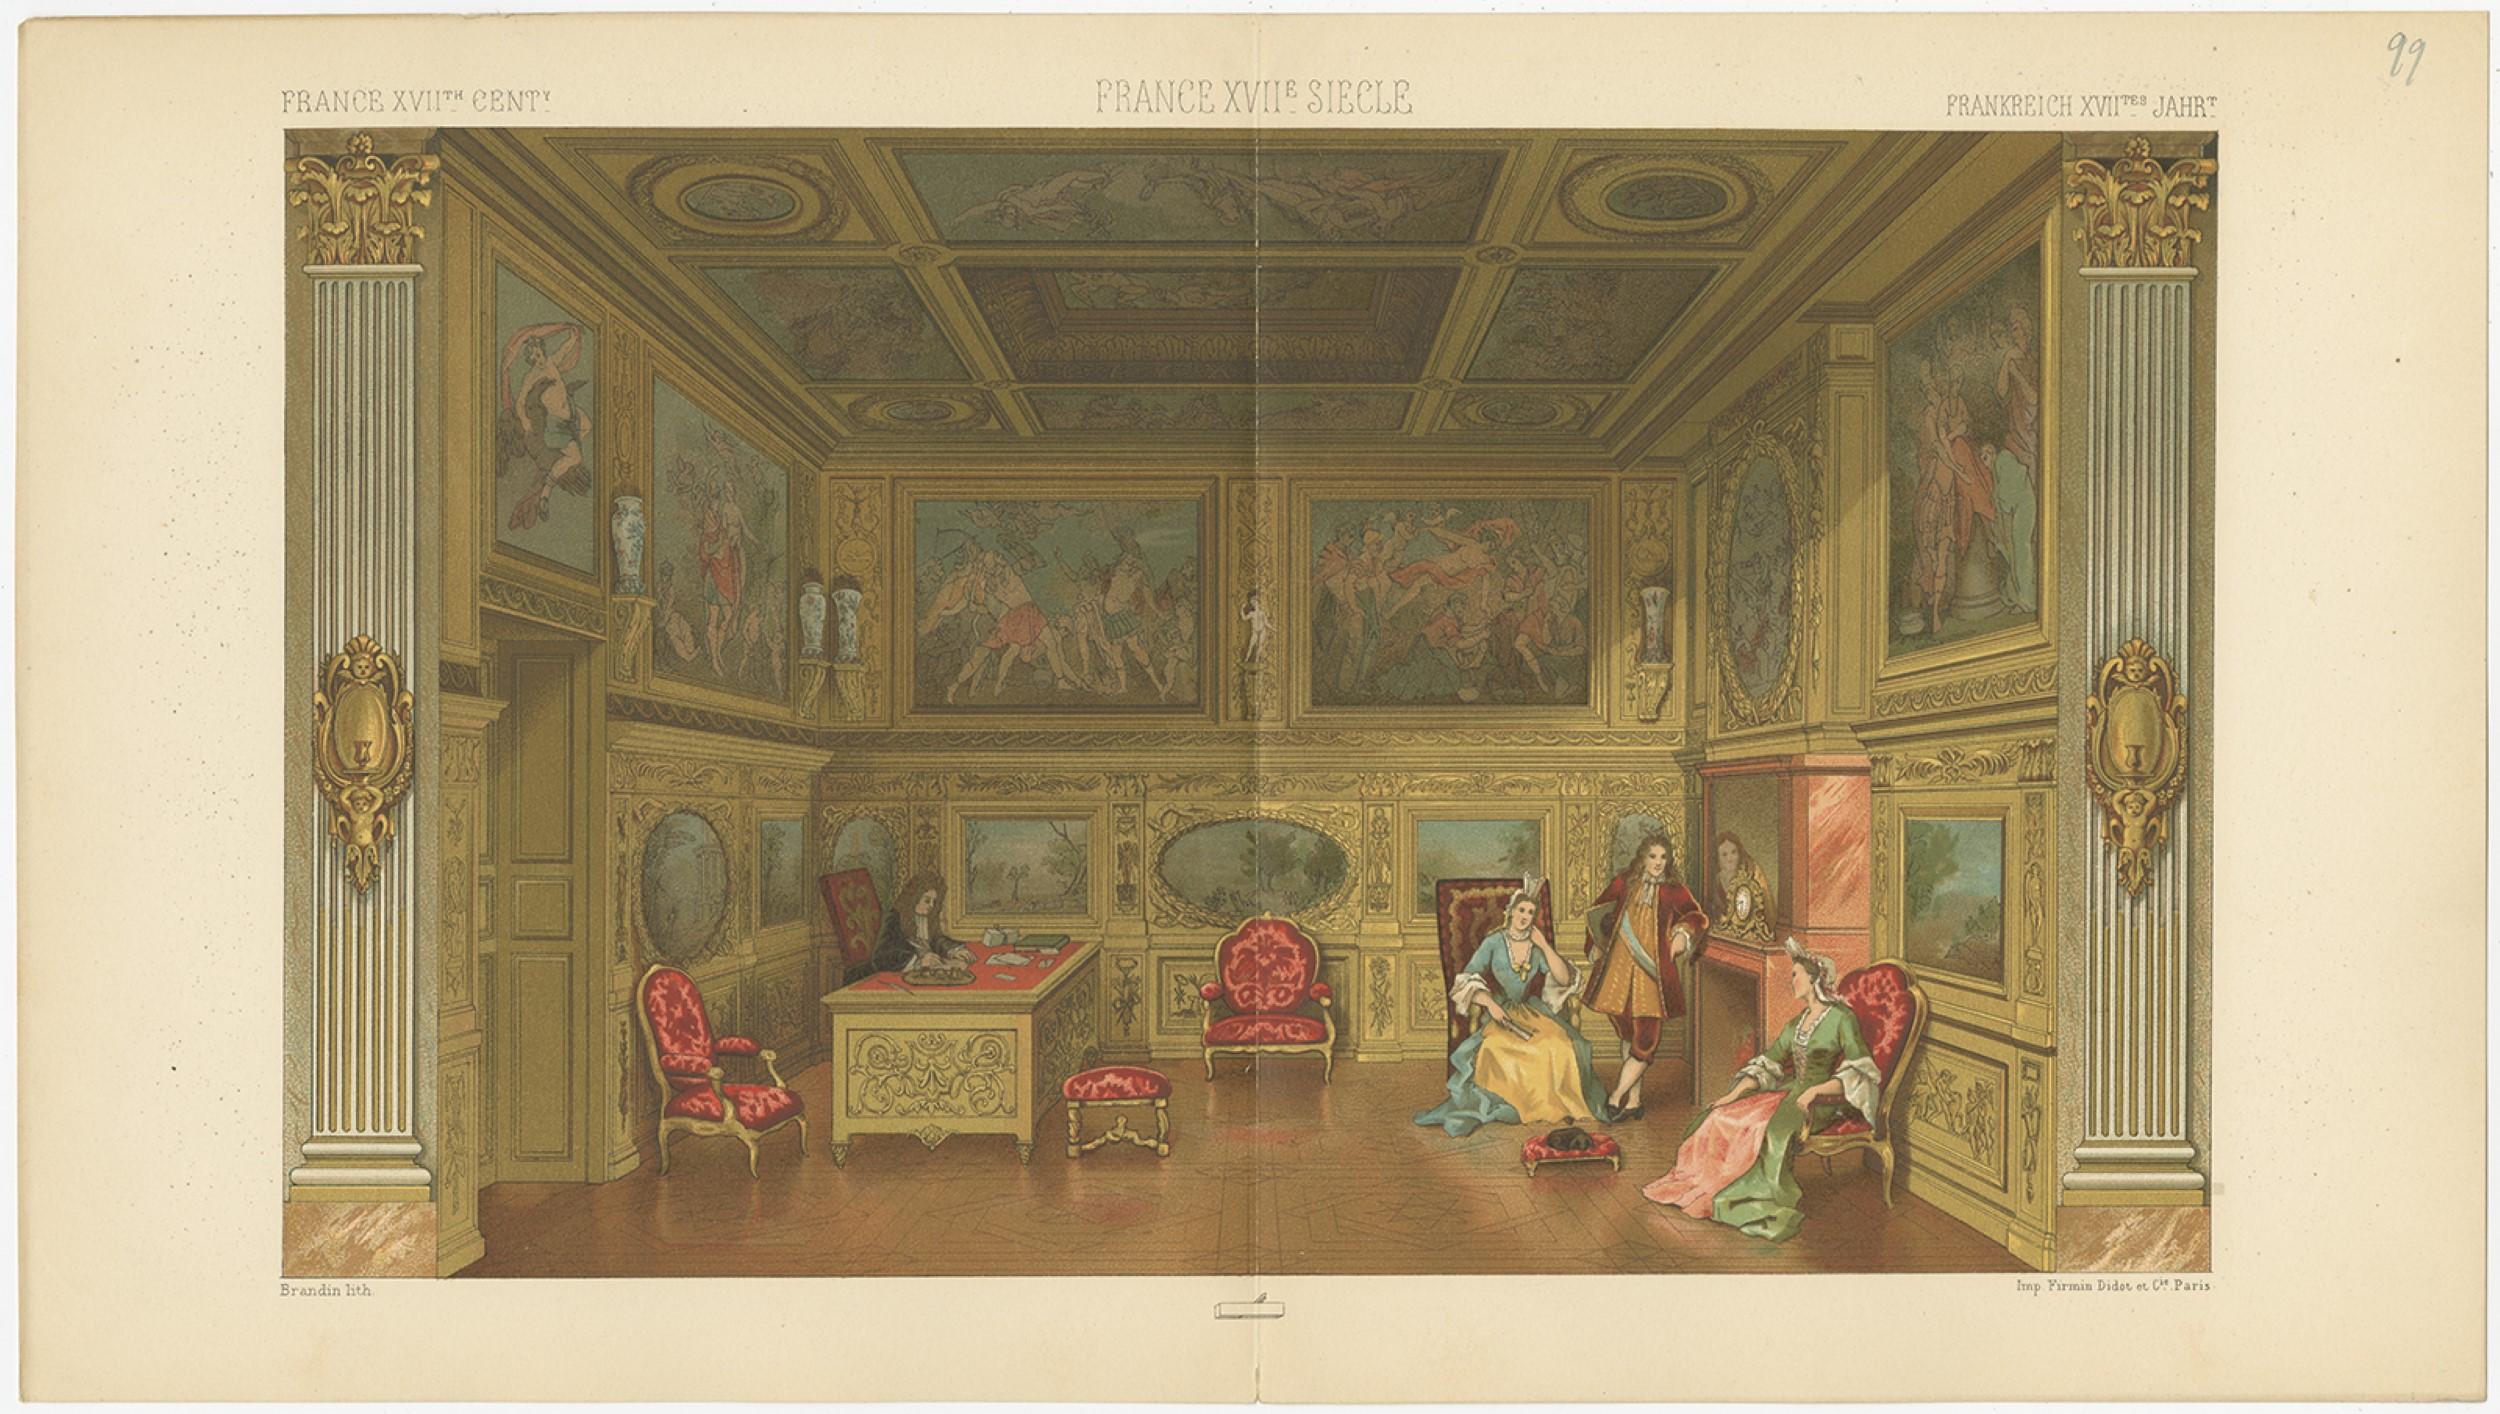 Antique print titled 'France XVIIth Cent - France XVIIe Siegle - Frankreich XVIIth'. Chromolithograph of French 17th century office. This print originates from 'Le Costume Historique' by M.A. Racinet. Published, circa 1880.